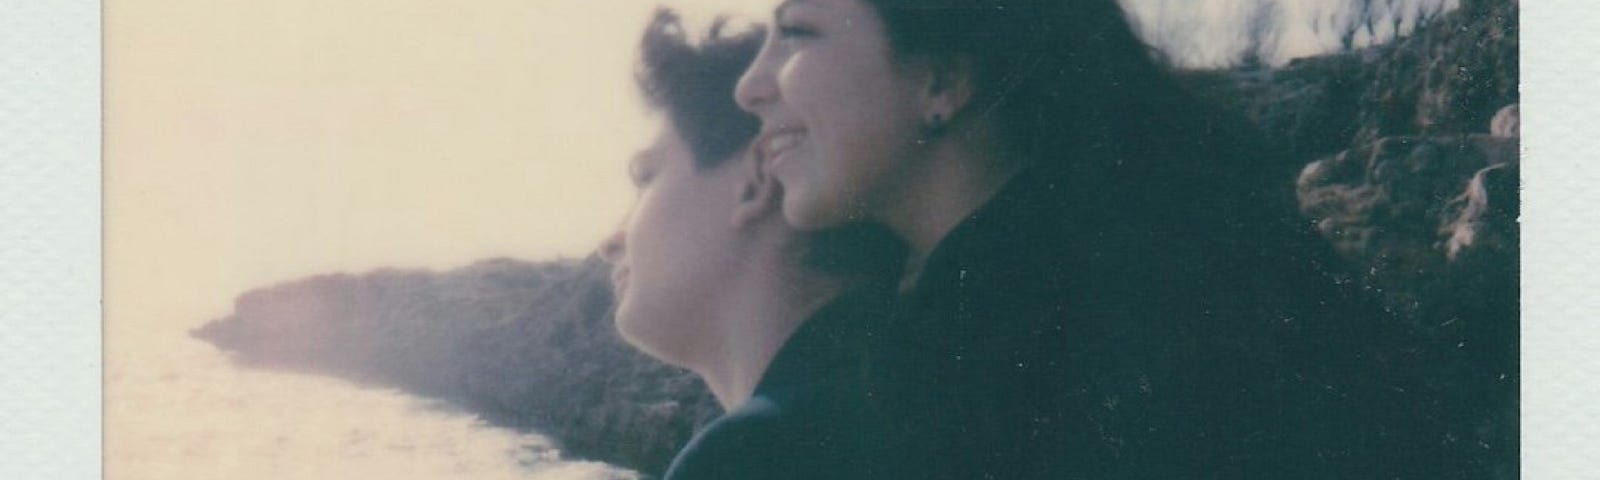 A couple in an old-looking photograph or Polaroid